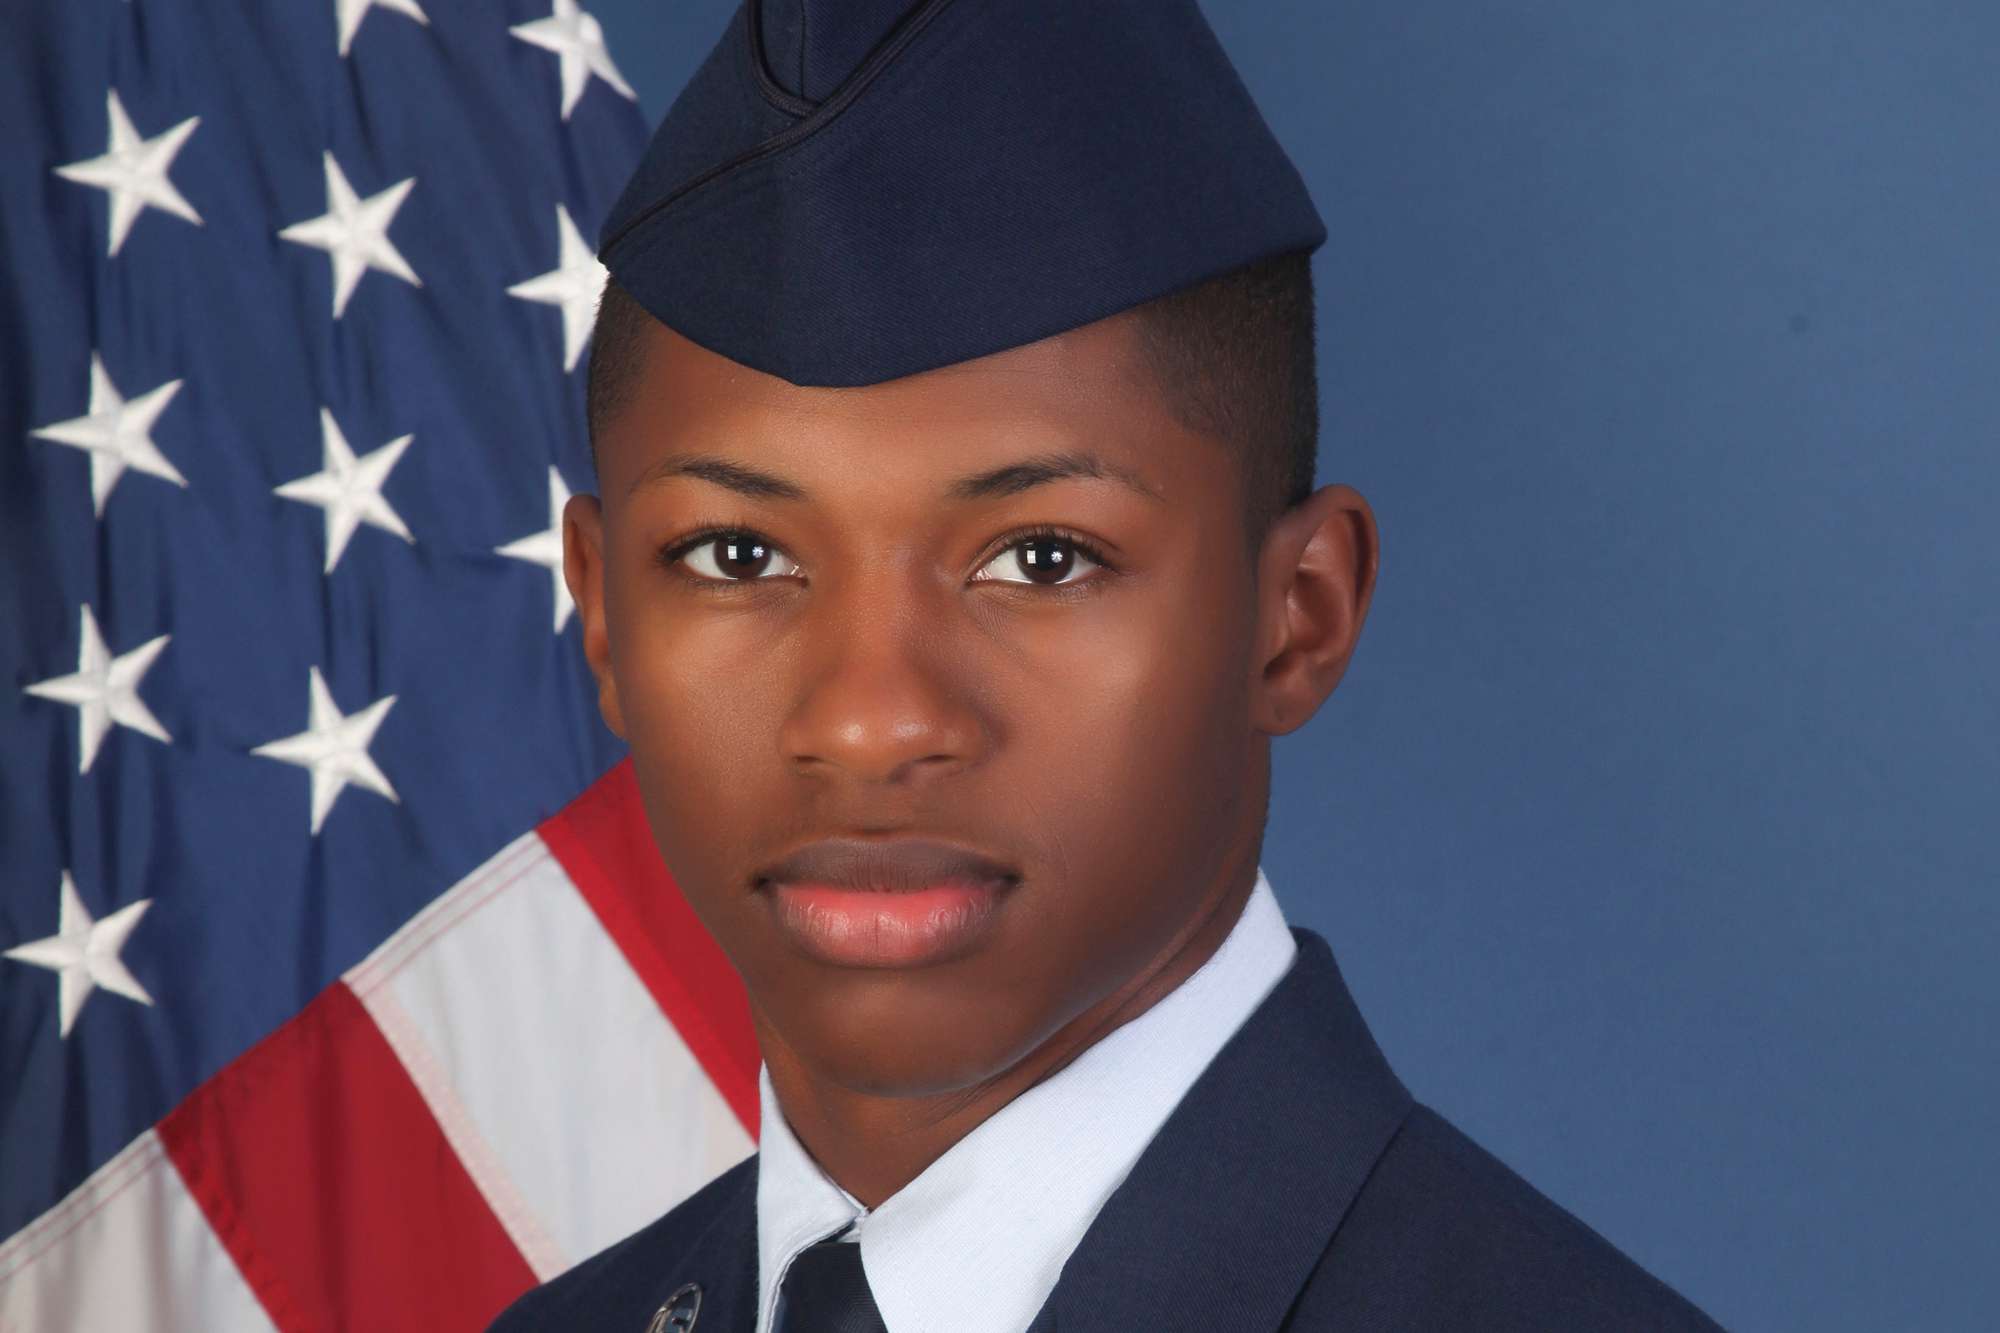 Girlfriend of Slain U.S. Airman Roger Fortson Releases FaceTime Video of Fatal Police Encounter